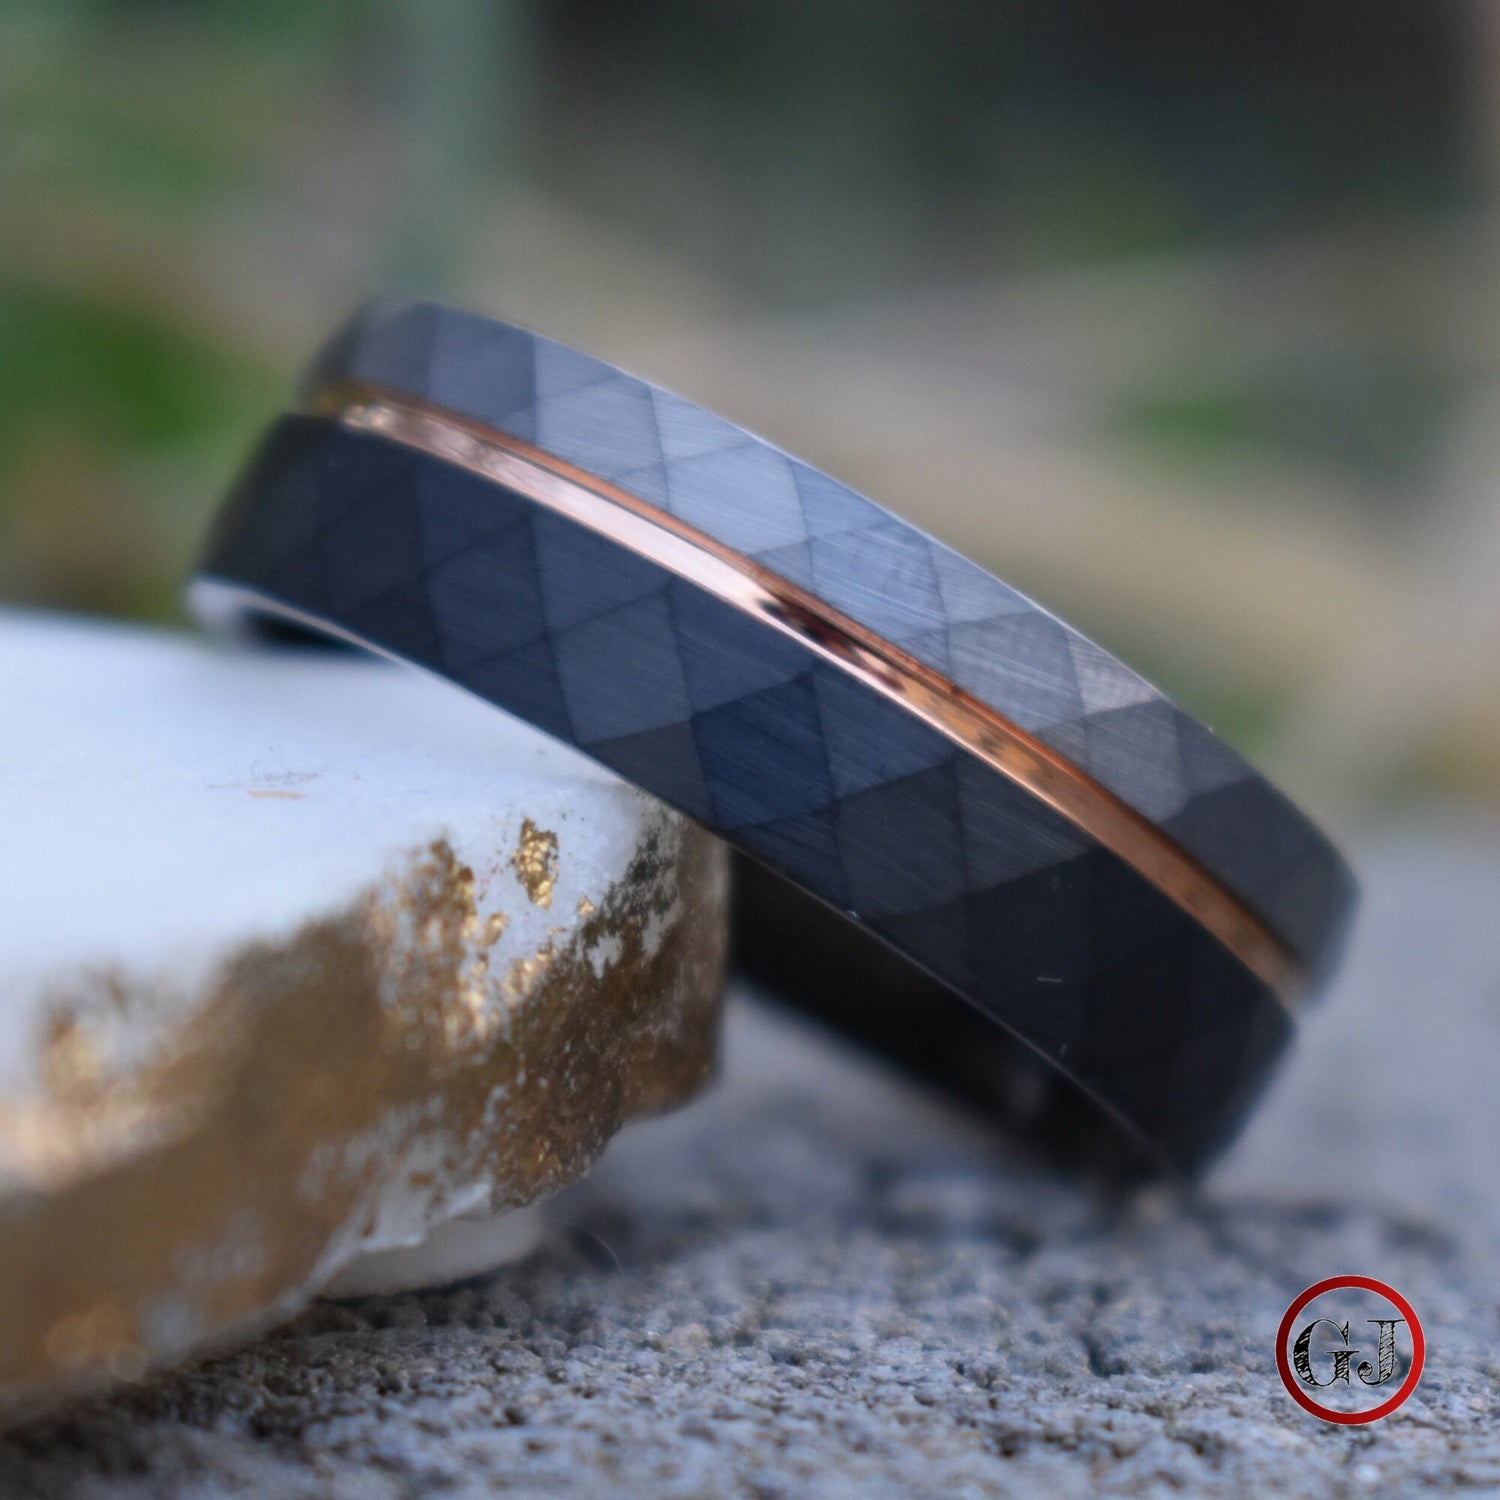 Hammered Tungsten Ring Black and Silver Brushed with Rose Gold Accent, Mens Ring, Mens Wedding Band